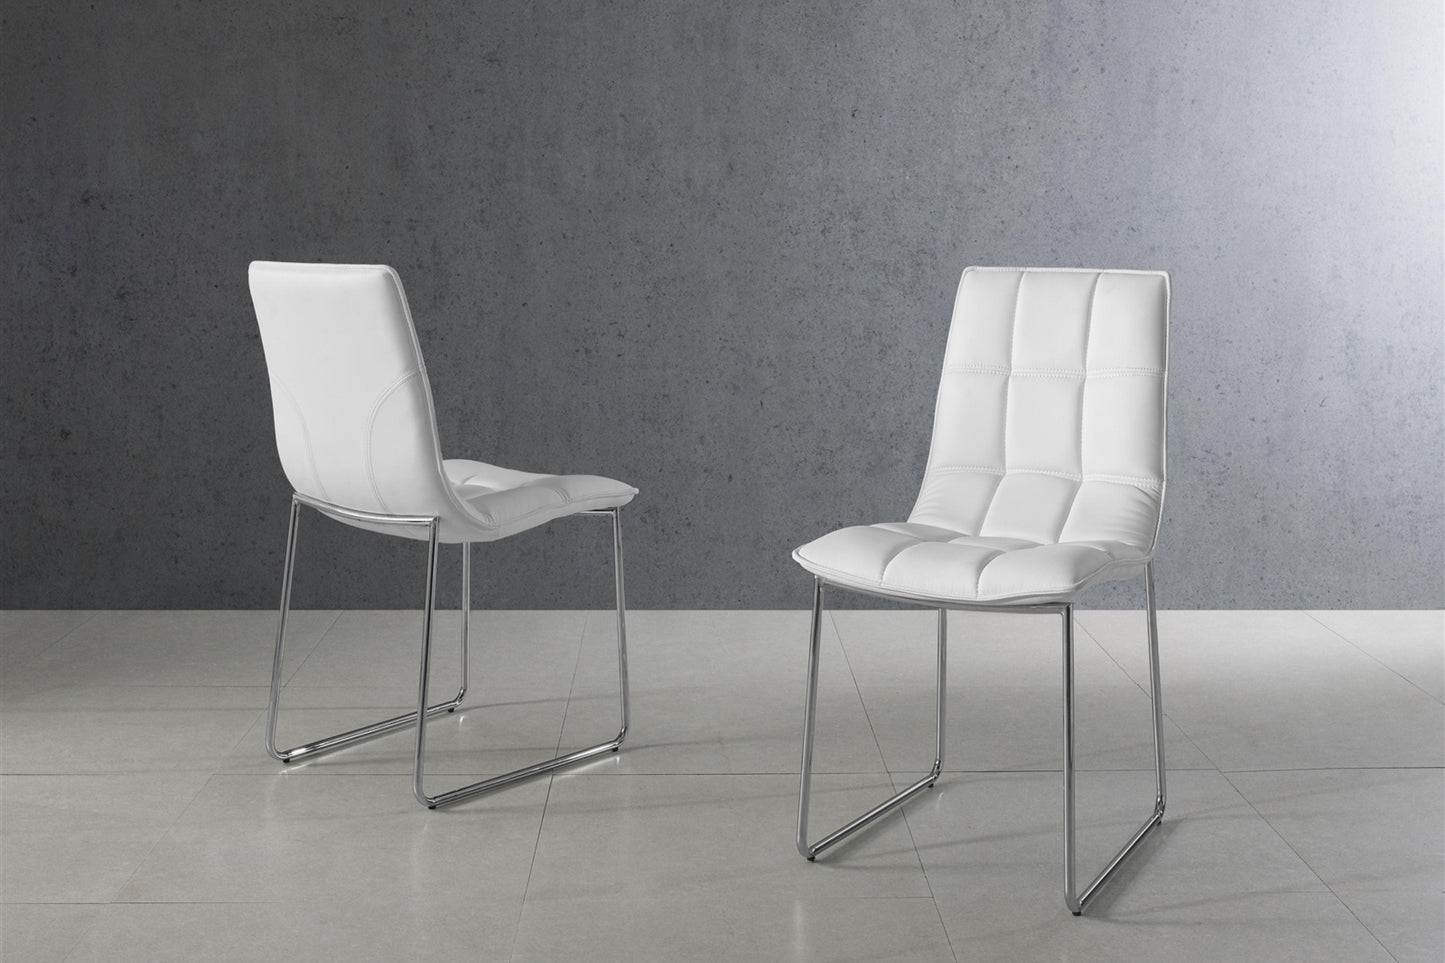 dining chair in black or white pu-leather